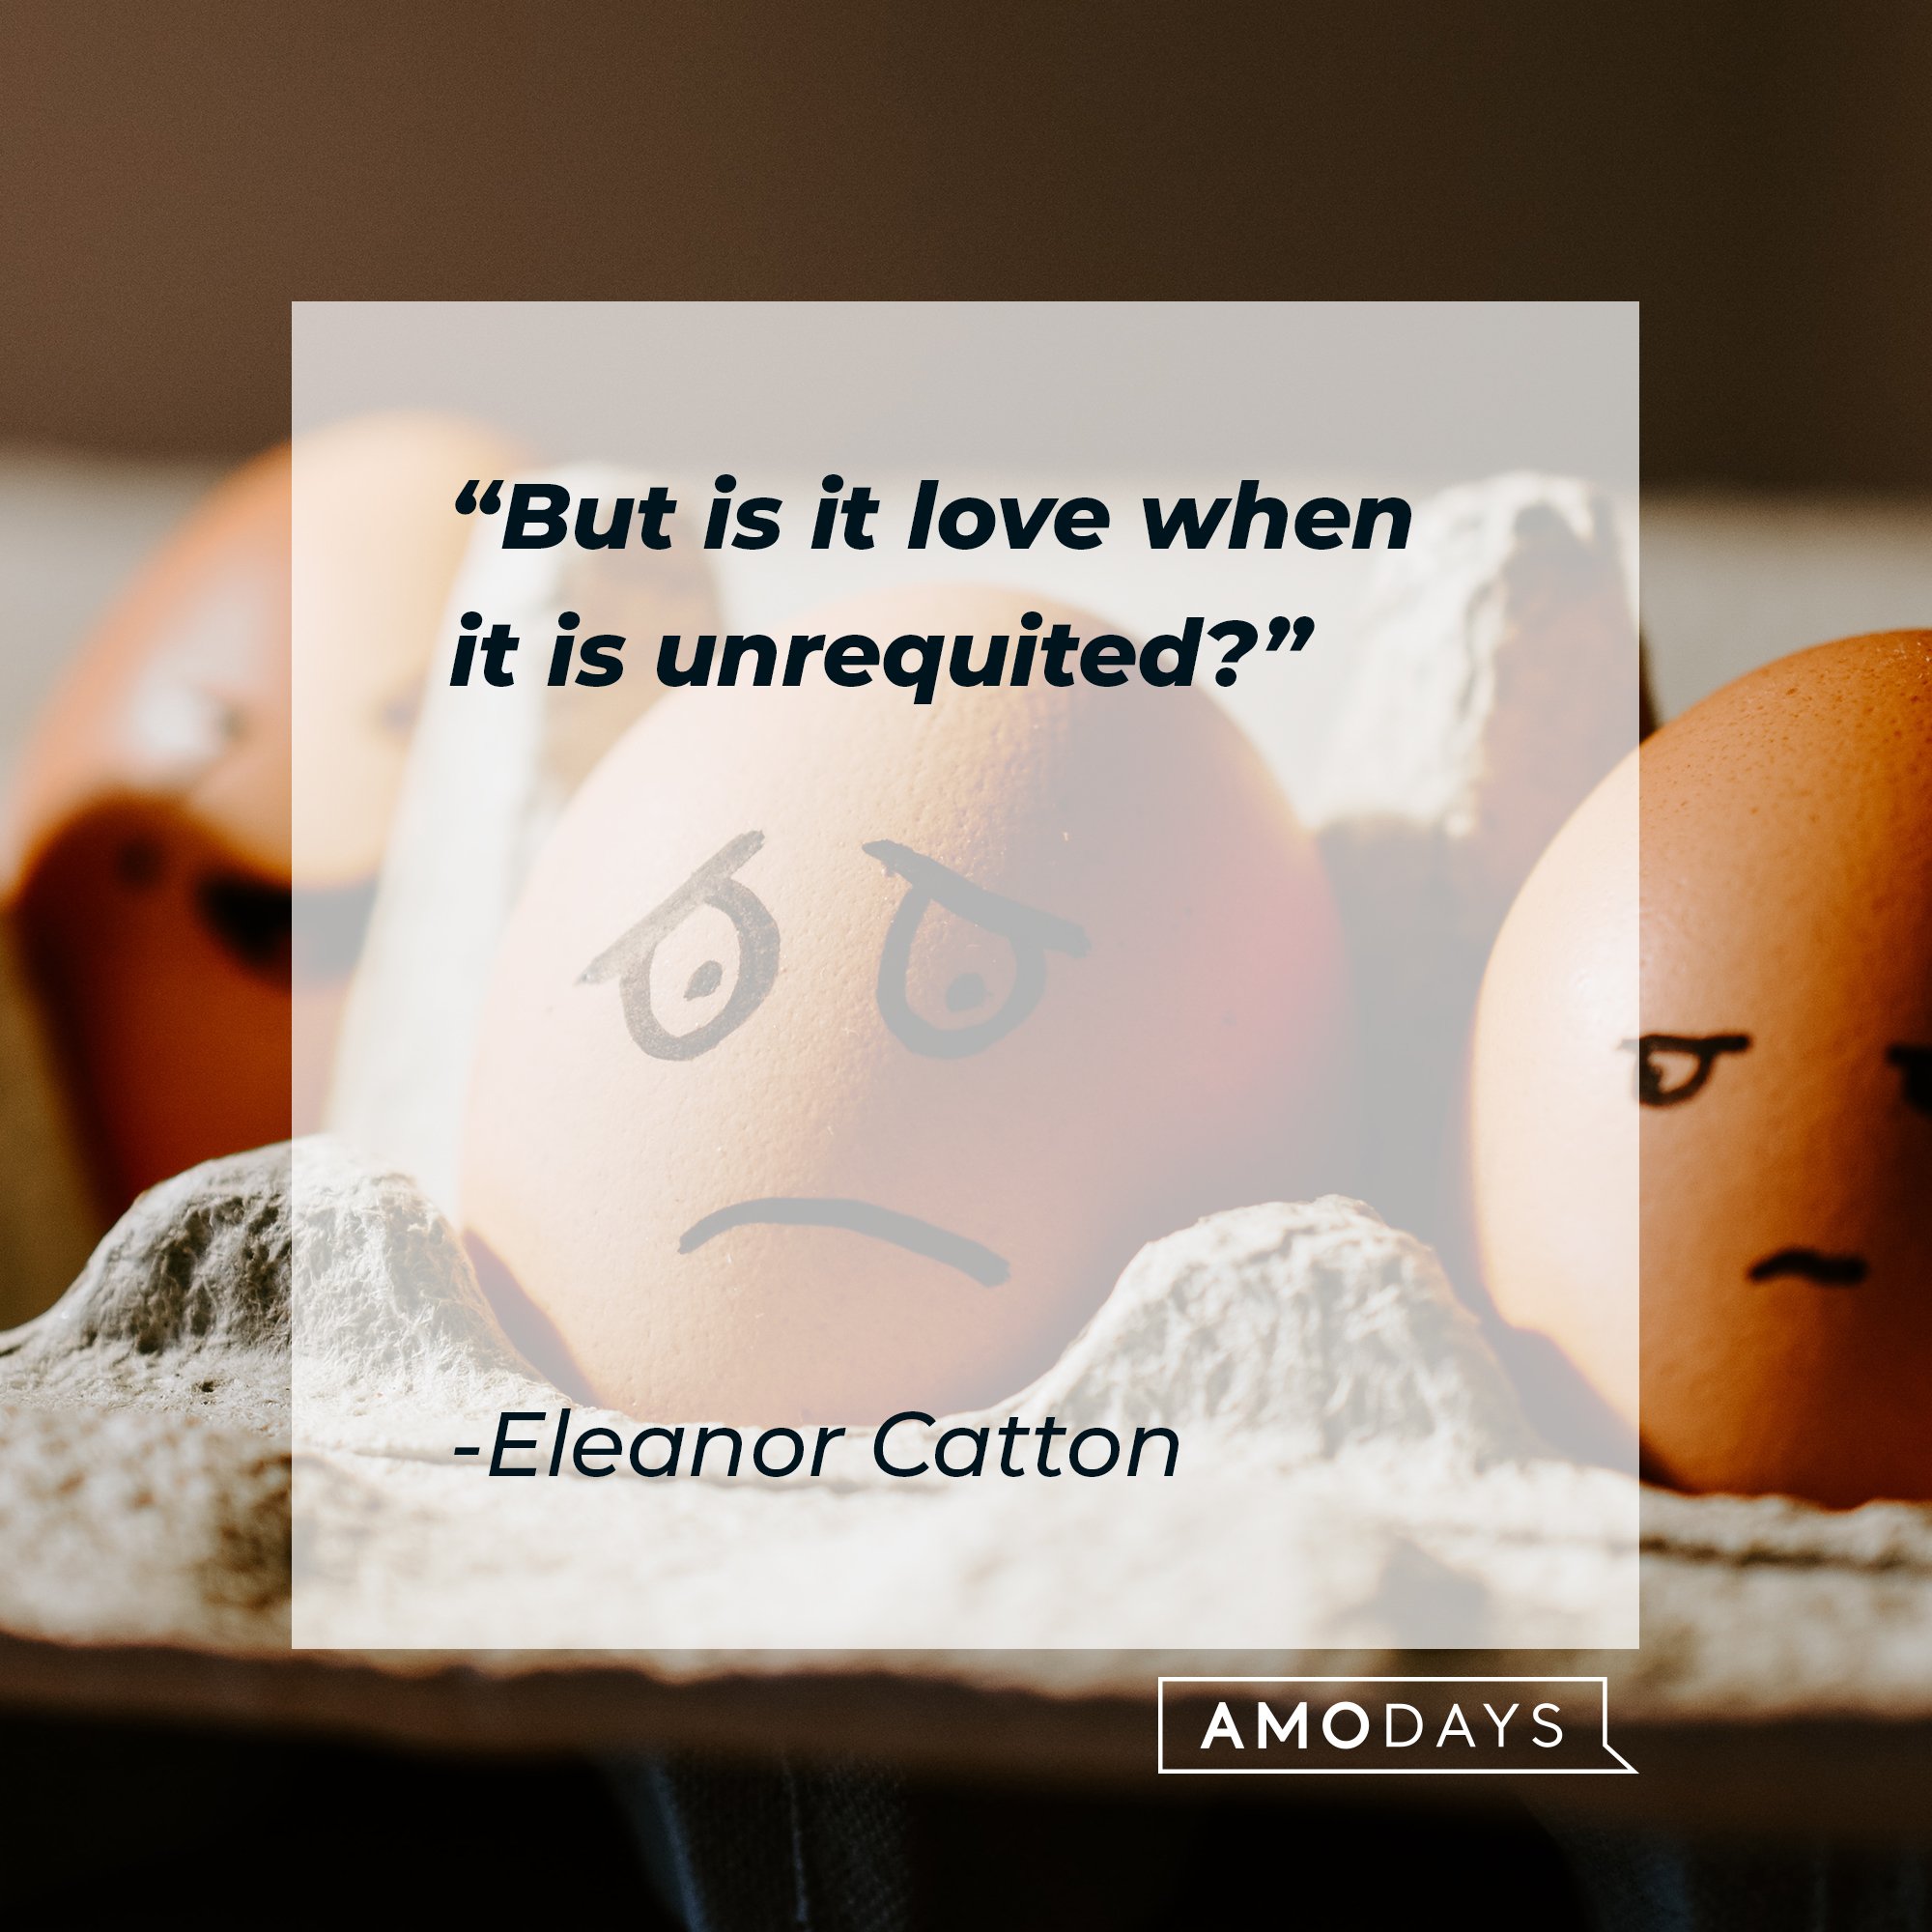 Eleanor Catton’s quote: "But is it love when it is unrequited?" | Image: AmoDays